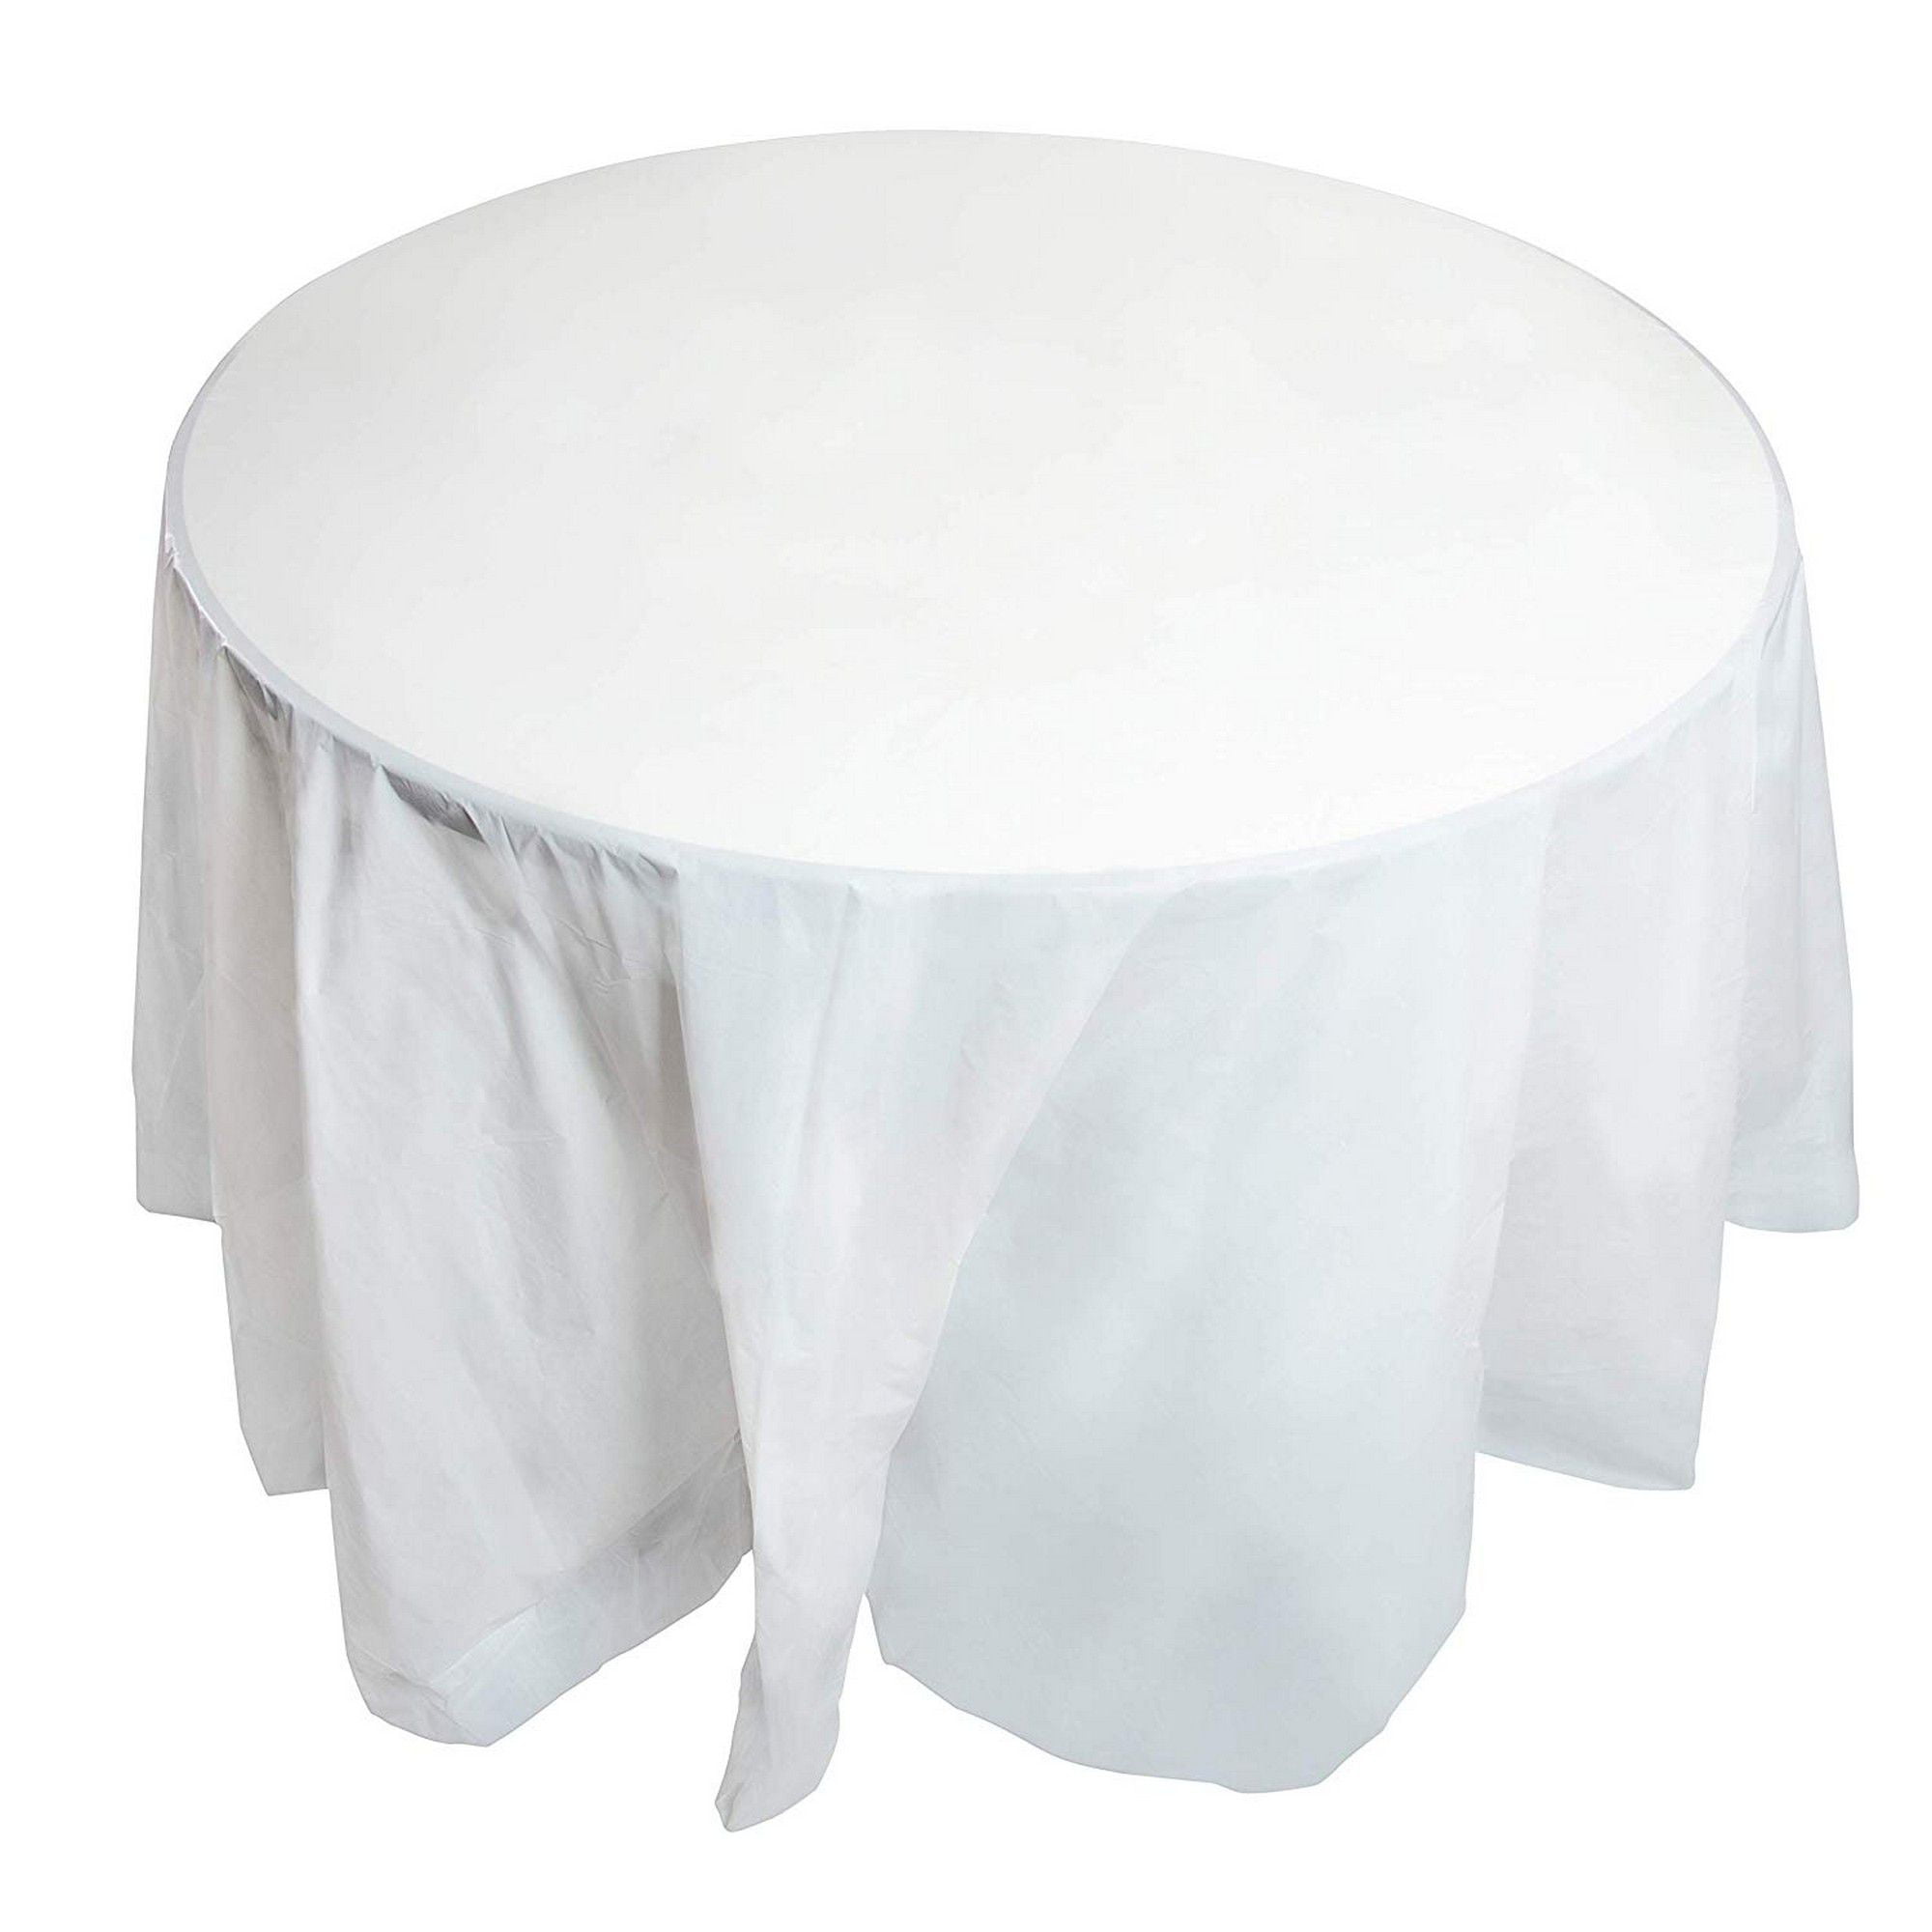 White table covers